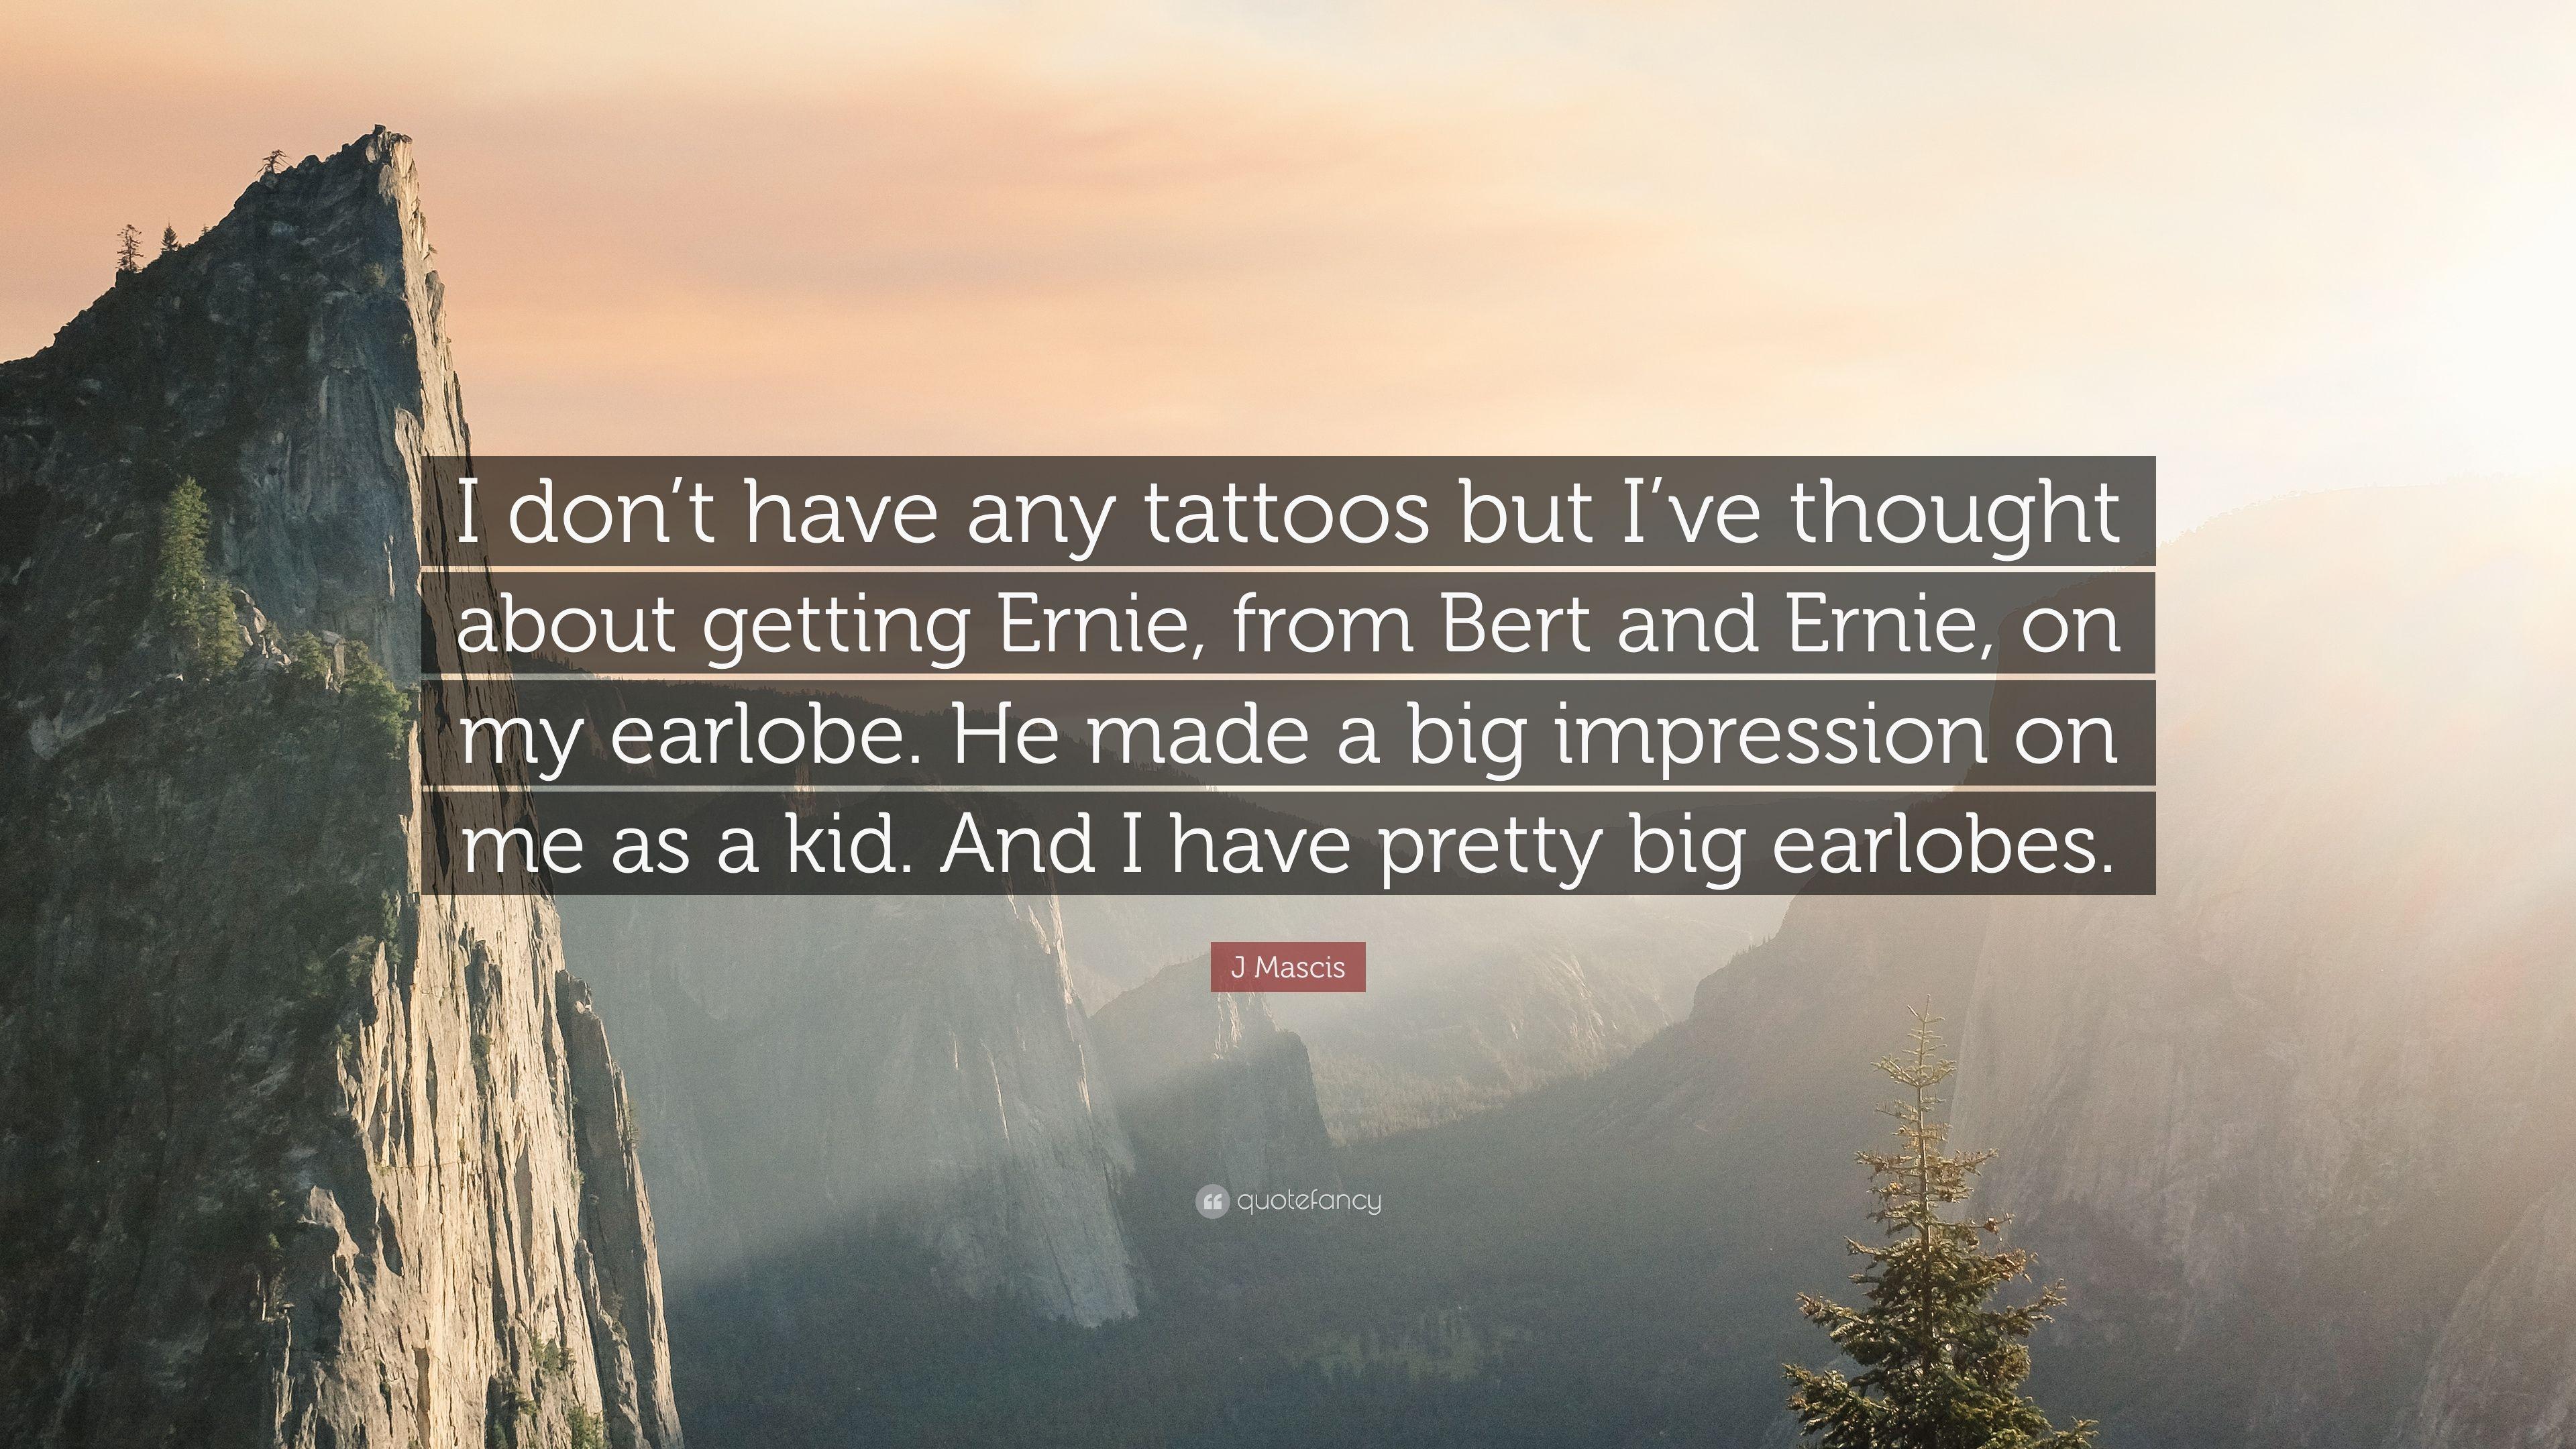 J Mascis Quote: “I don't have any tattoos but I've thought about